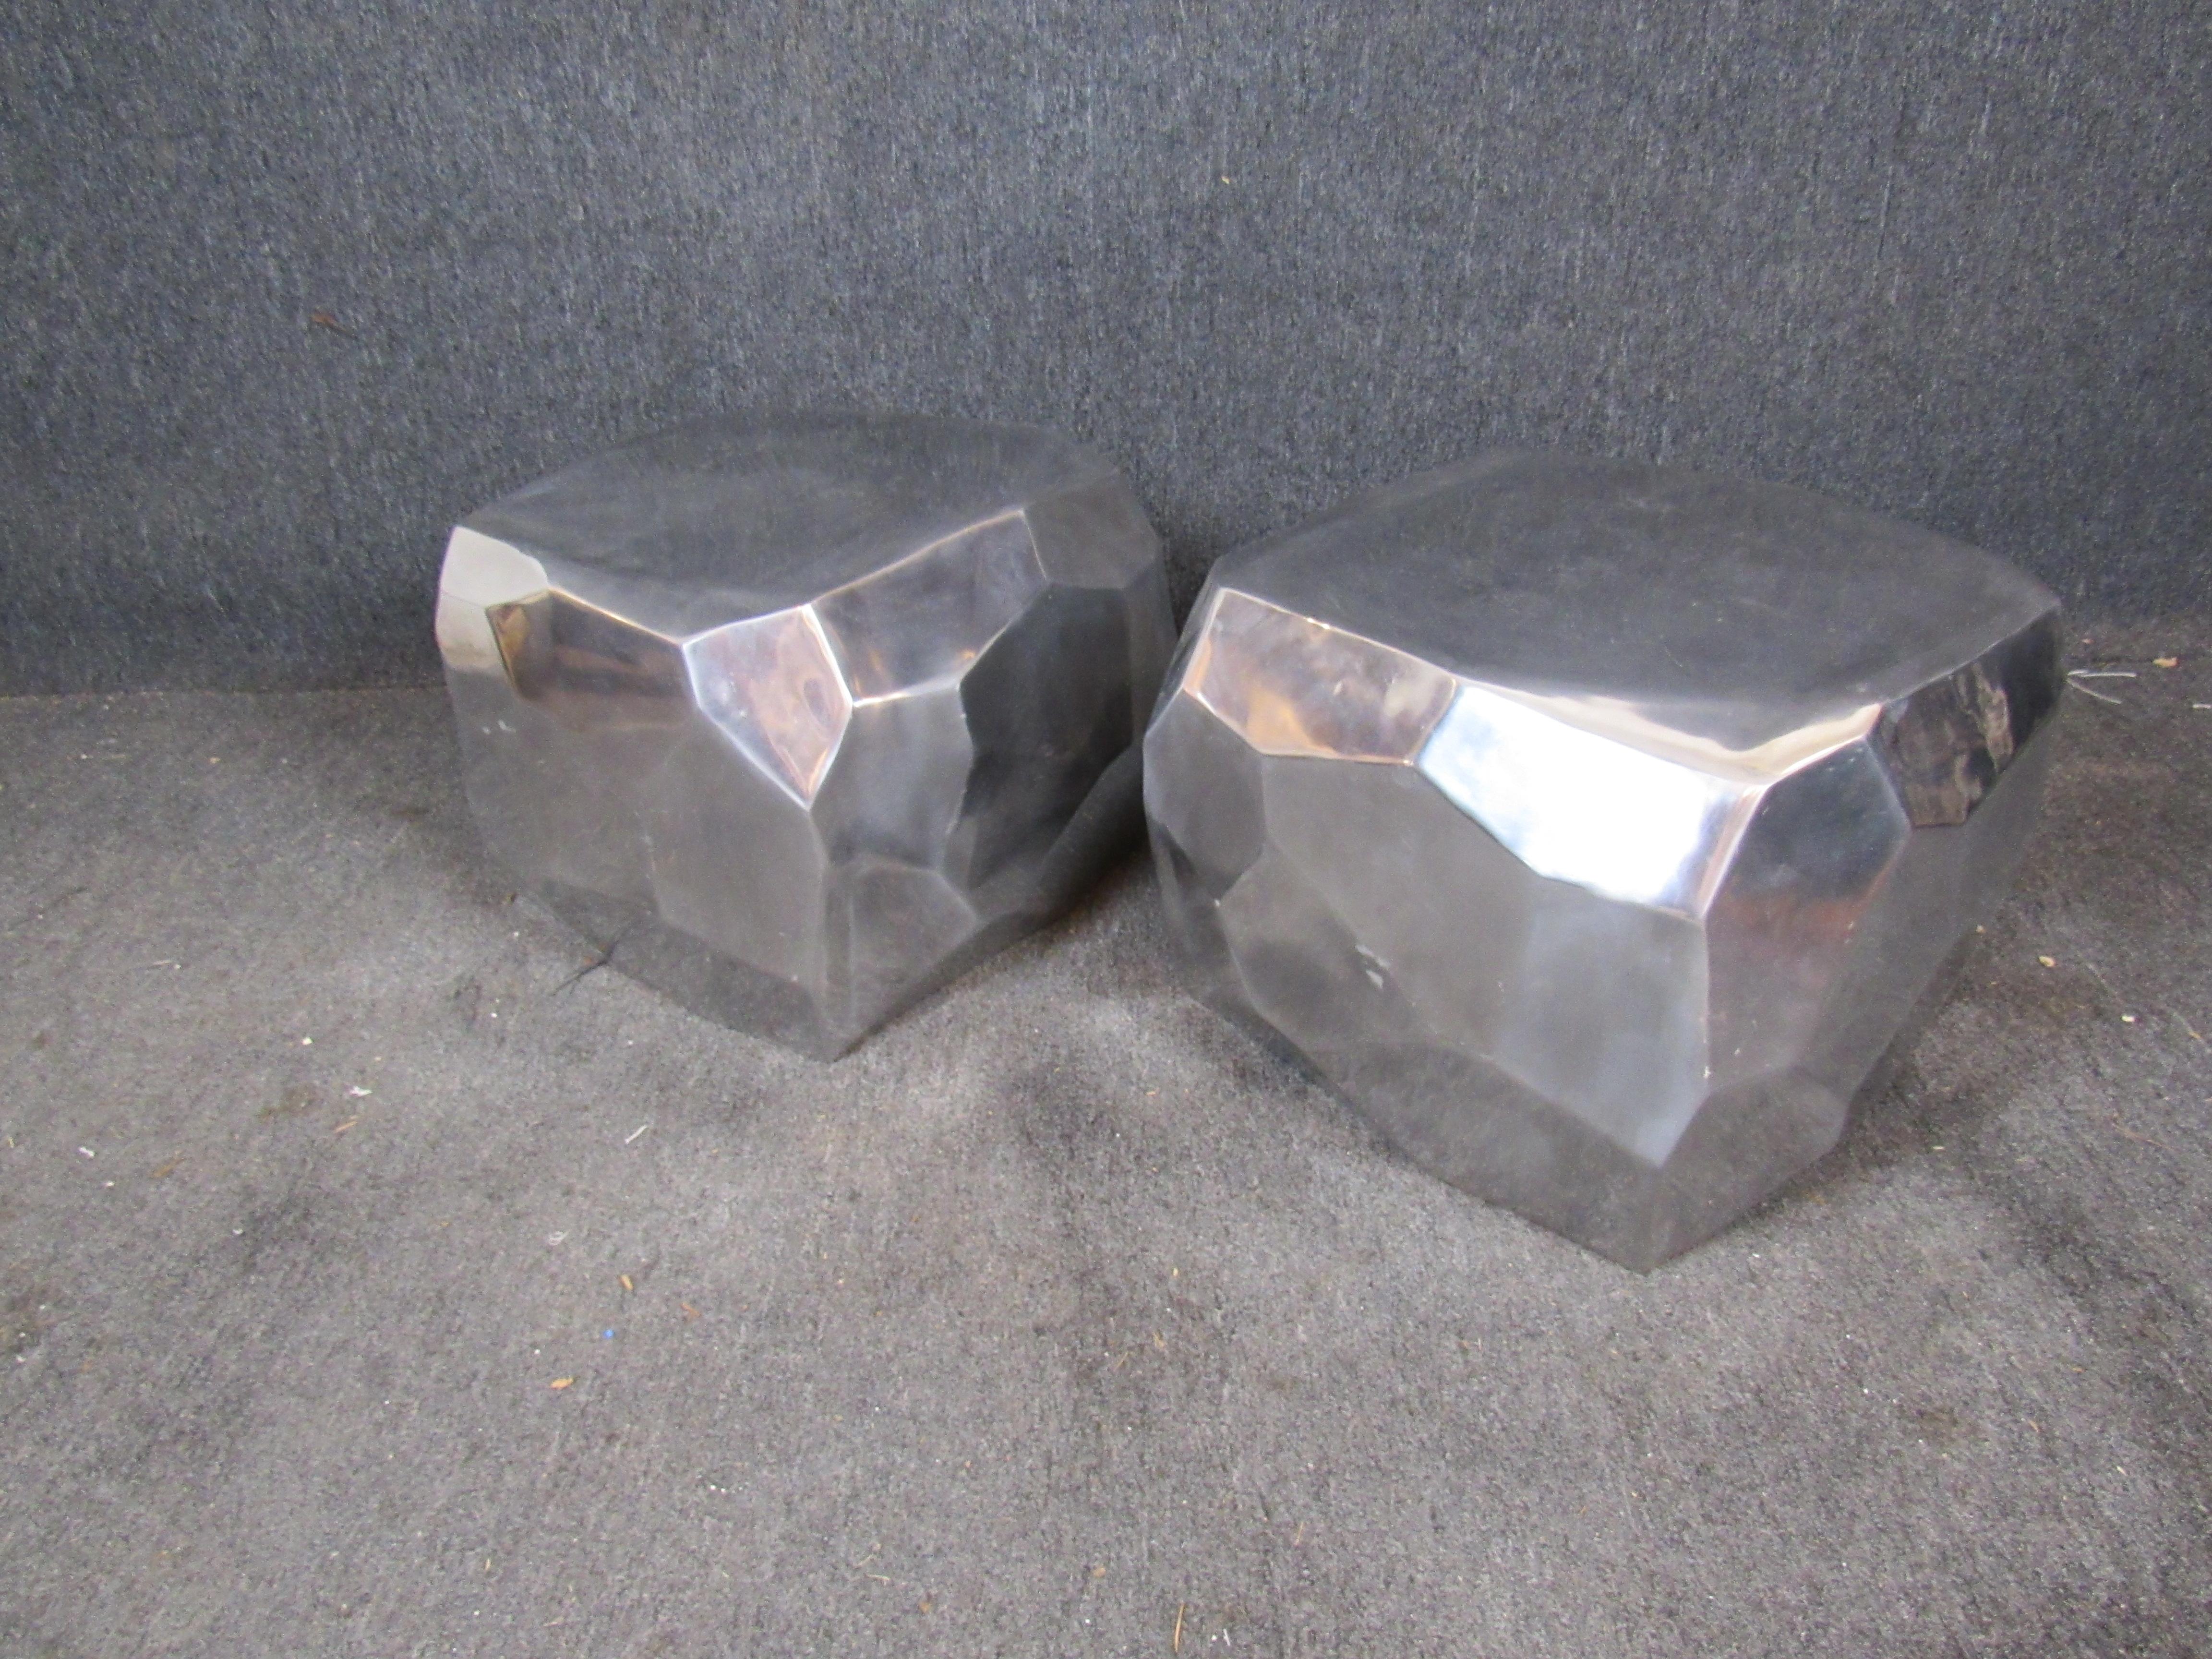 Whether in the stone age or the space age, these funky polished aluminum side tables are sure to make a statement! Featuring a hollow, asymmetrical form and a beautiful mirror like finish- these would also work great as unique stools or ottomans, or